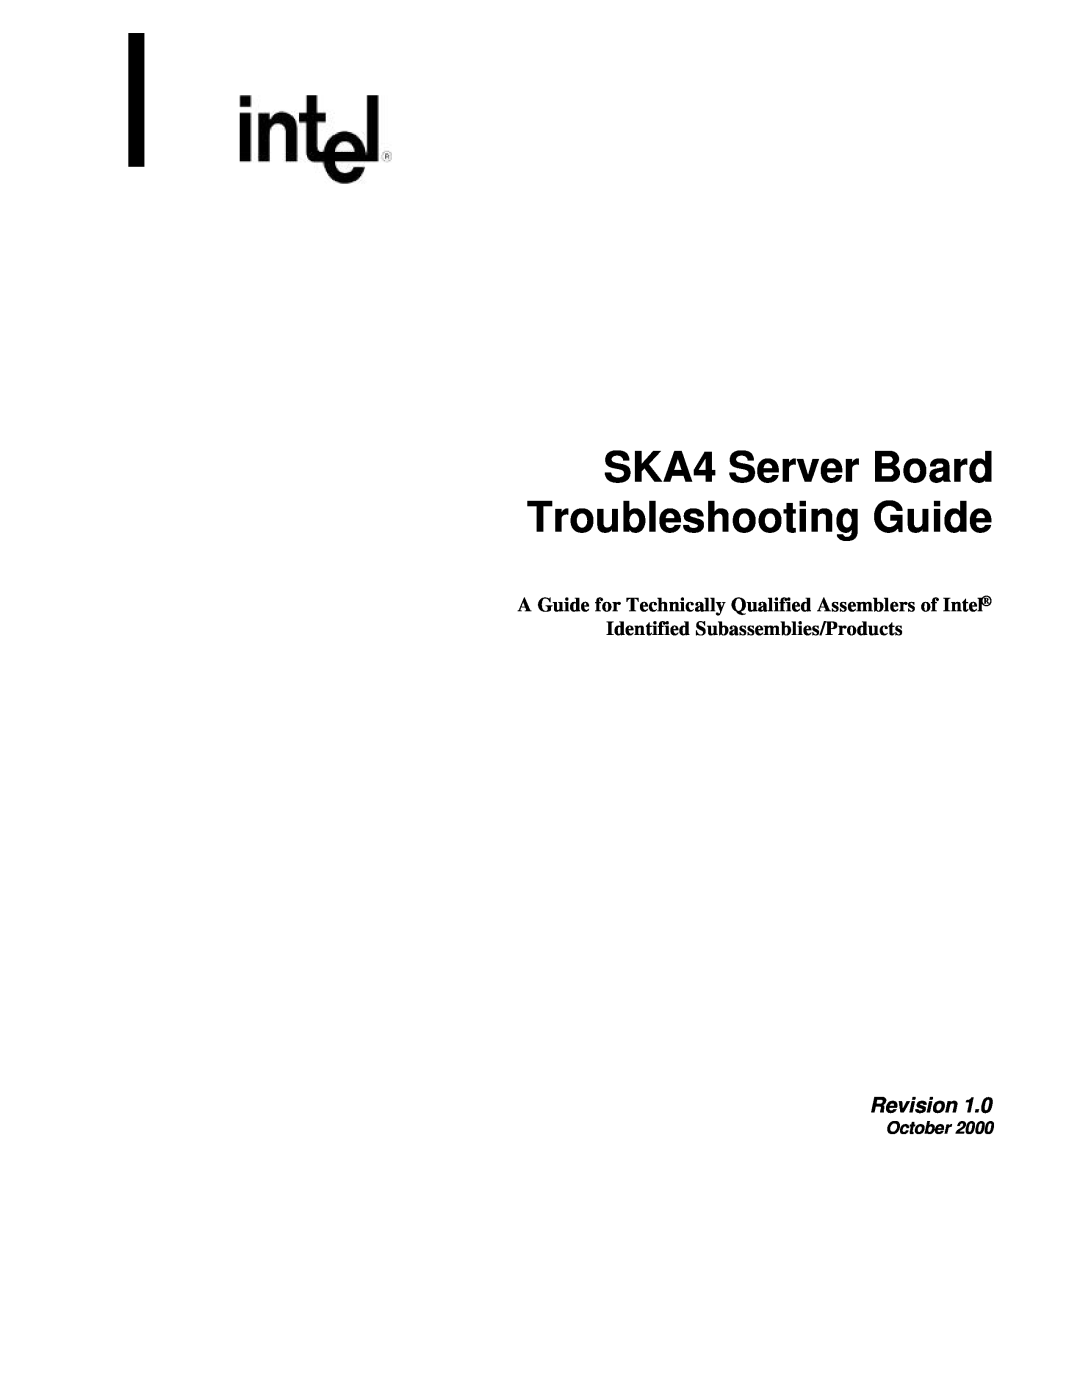 Intel manual SKA4 Server Board Troubleshooting Guide, Revision, Identified Subassemblies/Products, October 